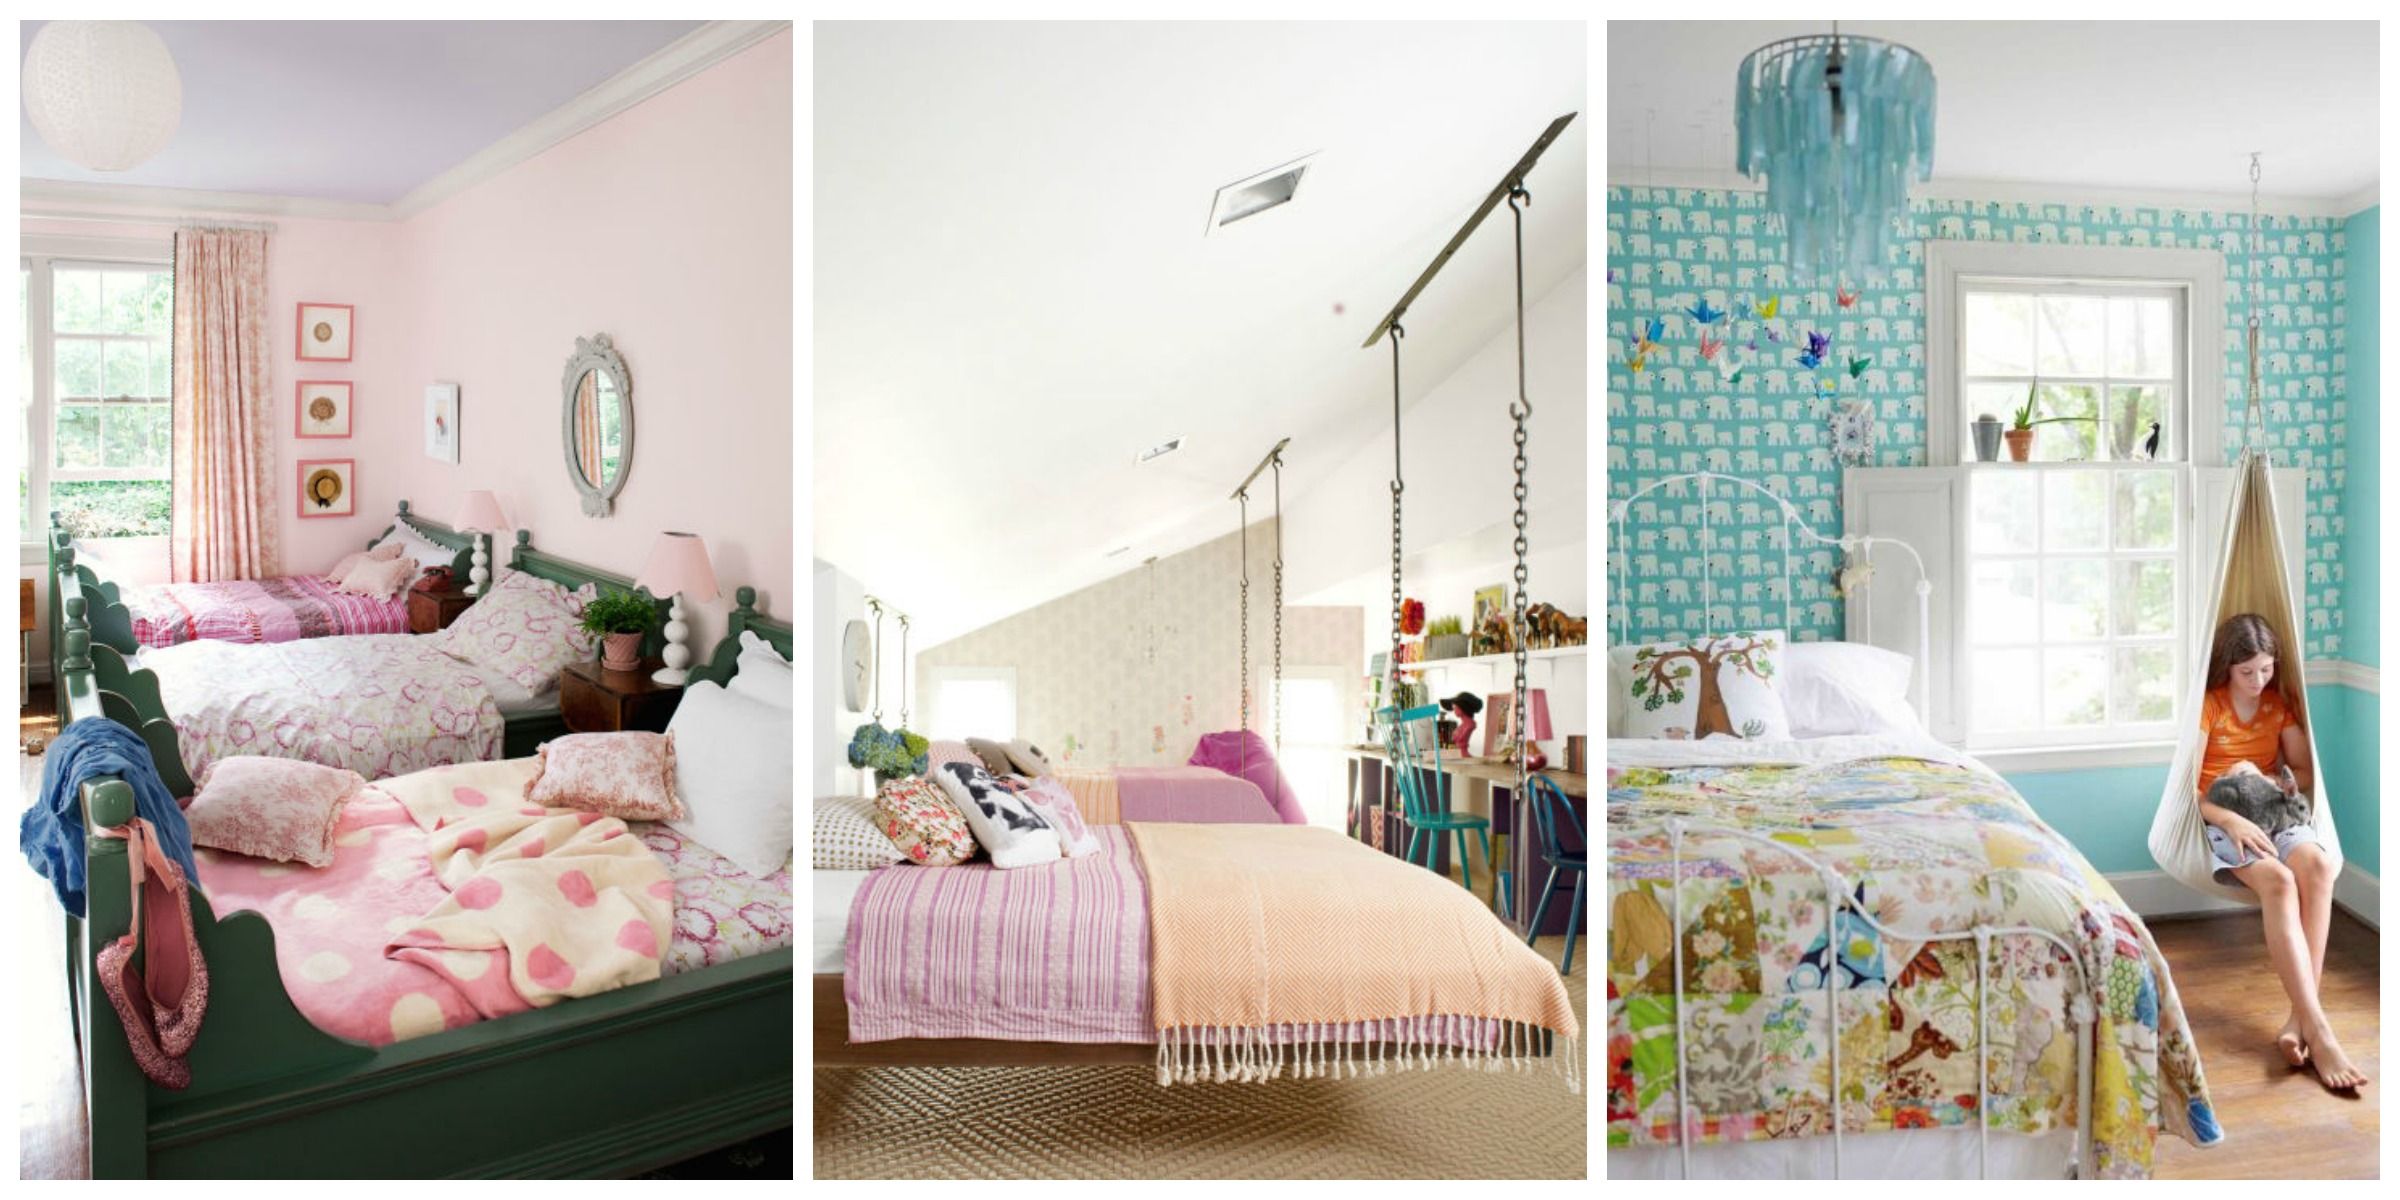 12 Fun Girl S Bedroom Decor Ideas Cute Room Decorating For Girls